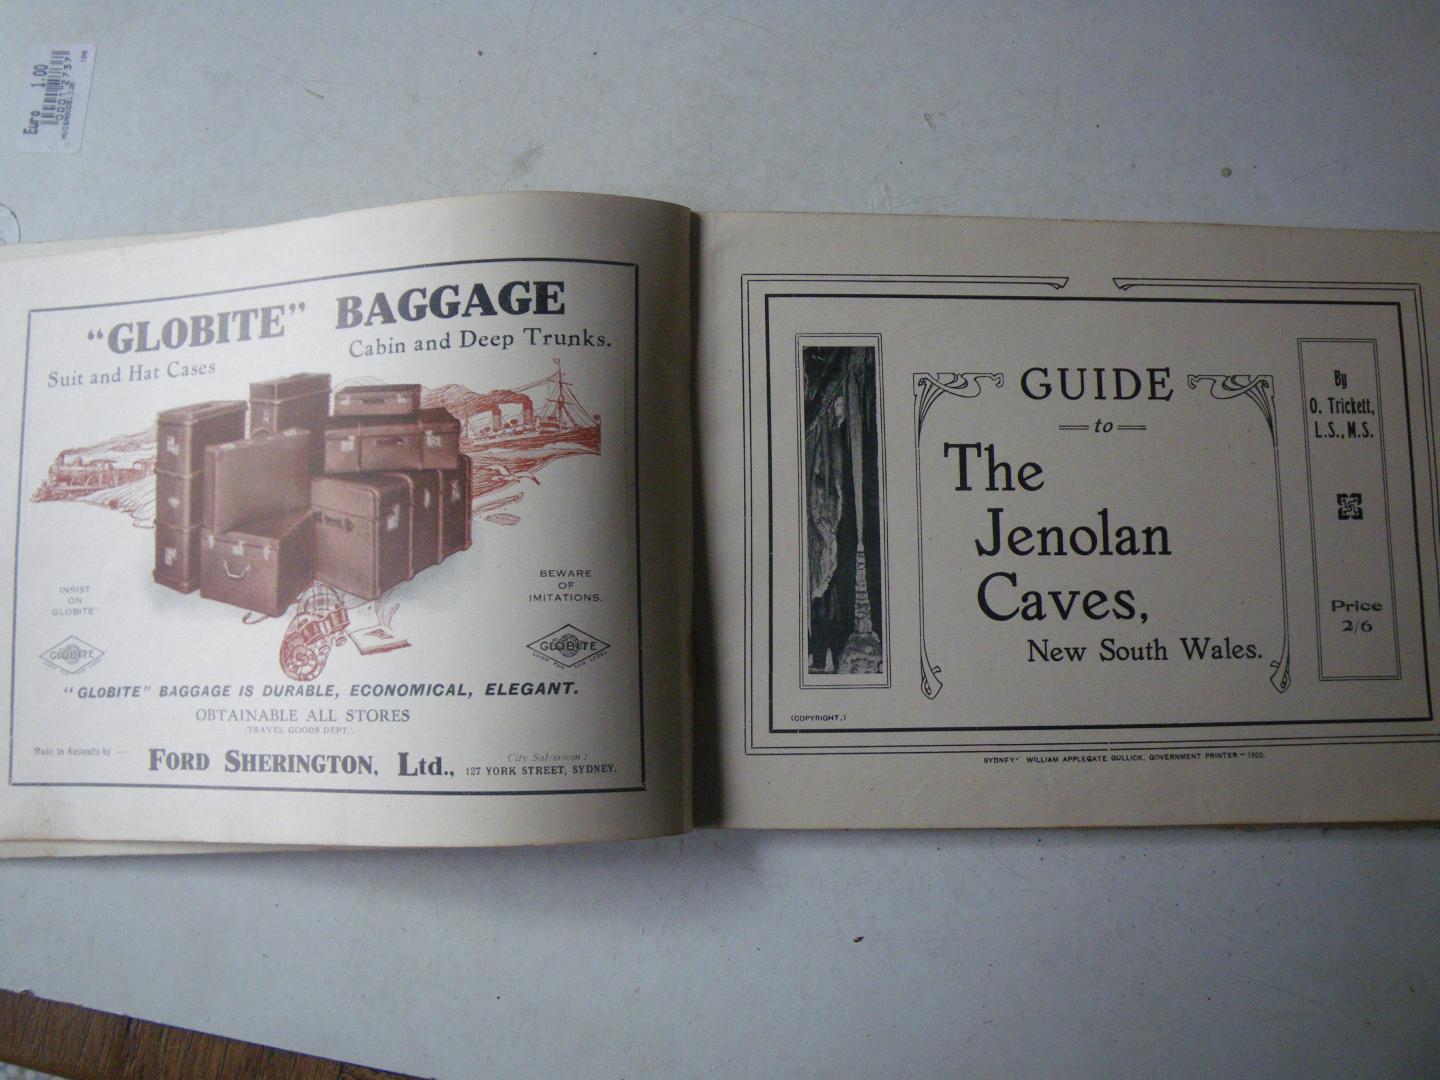 O. TRICKETT, L.S.M.S. - Guide to the Jenolan Caves, New South Wales